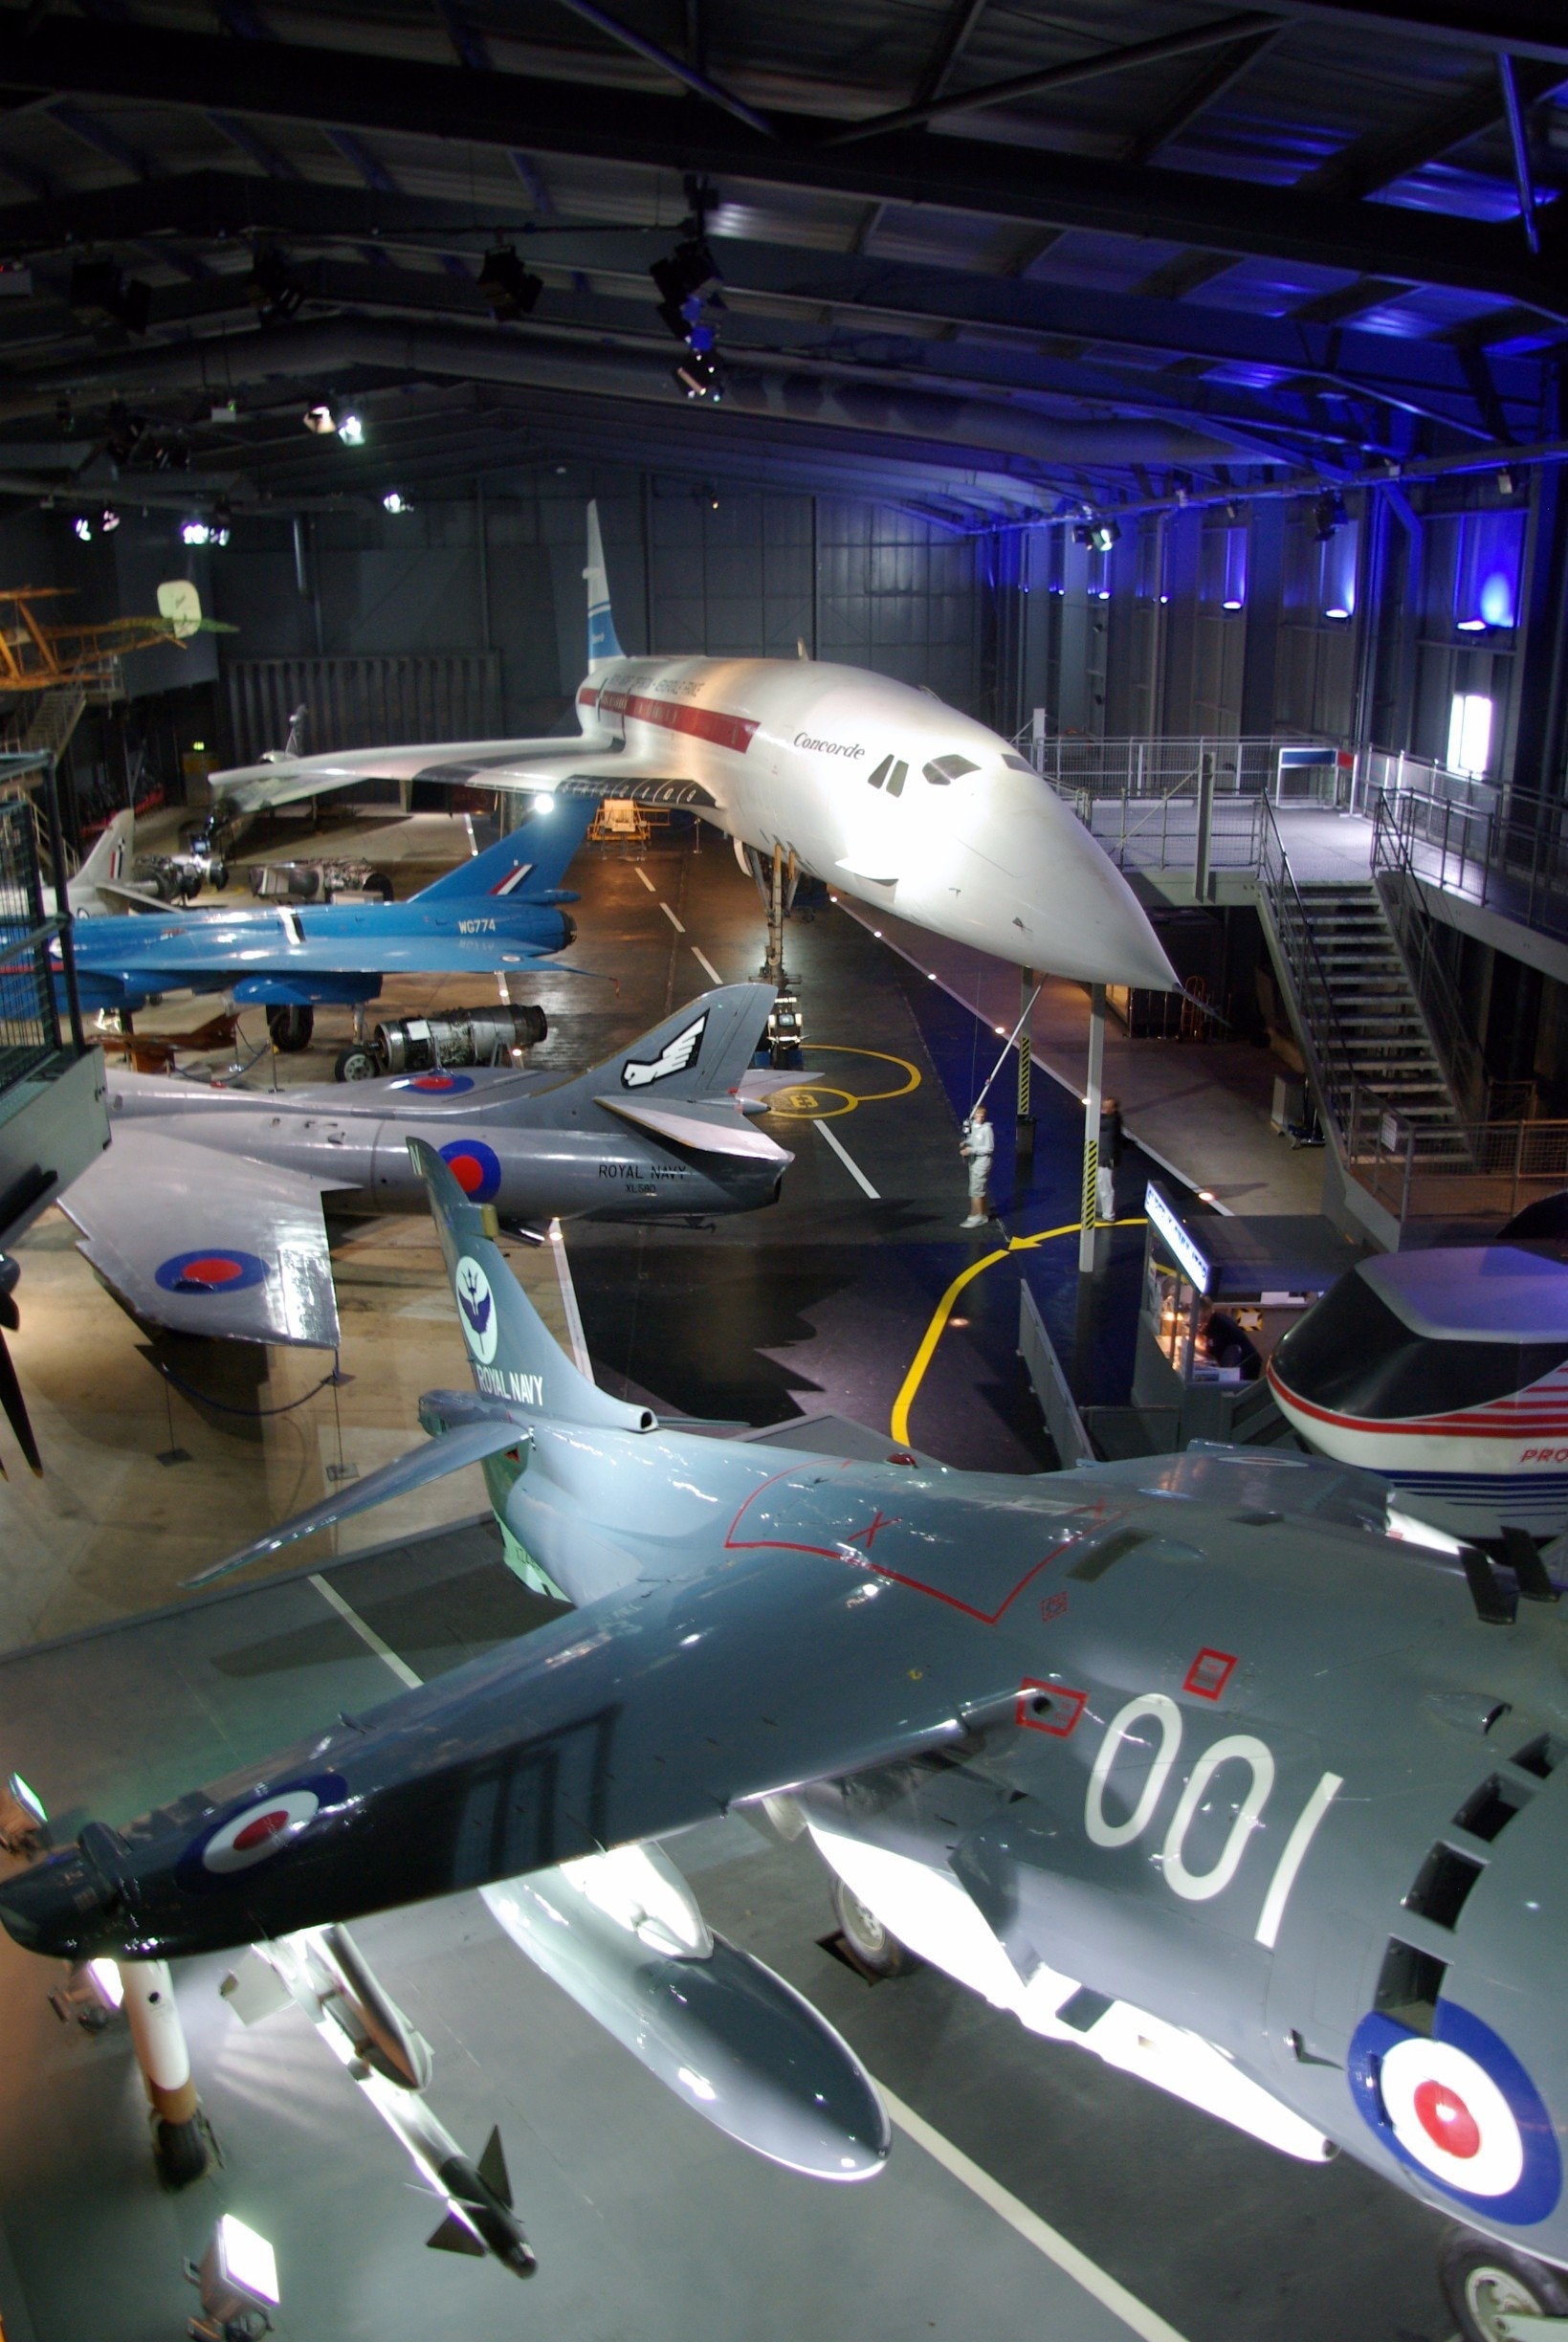 The Fleet Air Arm Museum is devoted to the history of British naval aviation. It has an extensive collection of military and civilian aircraft, aero engines, models of aircraft and Royal Navy ships (especially aircraft carriers), and paintings and drawings related to naval aviation. It is located on RNAS Yeovilton airfield, and the museum has viewing areas where visitors can watch military aircraft (especially helicopters) take off and land. It is located 7 miles (11 km) north of Yeovil, and 40 miles (64 km) south of Bristol.